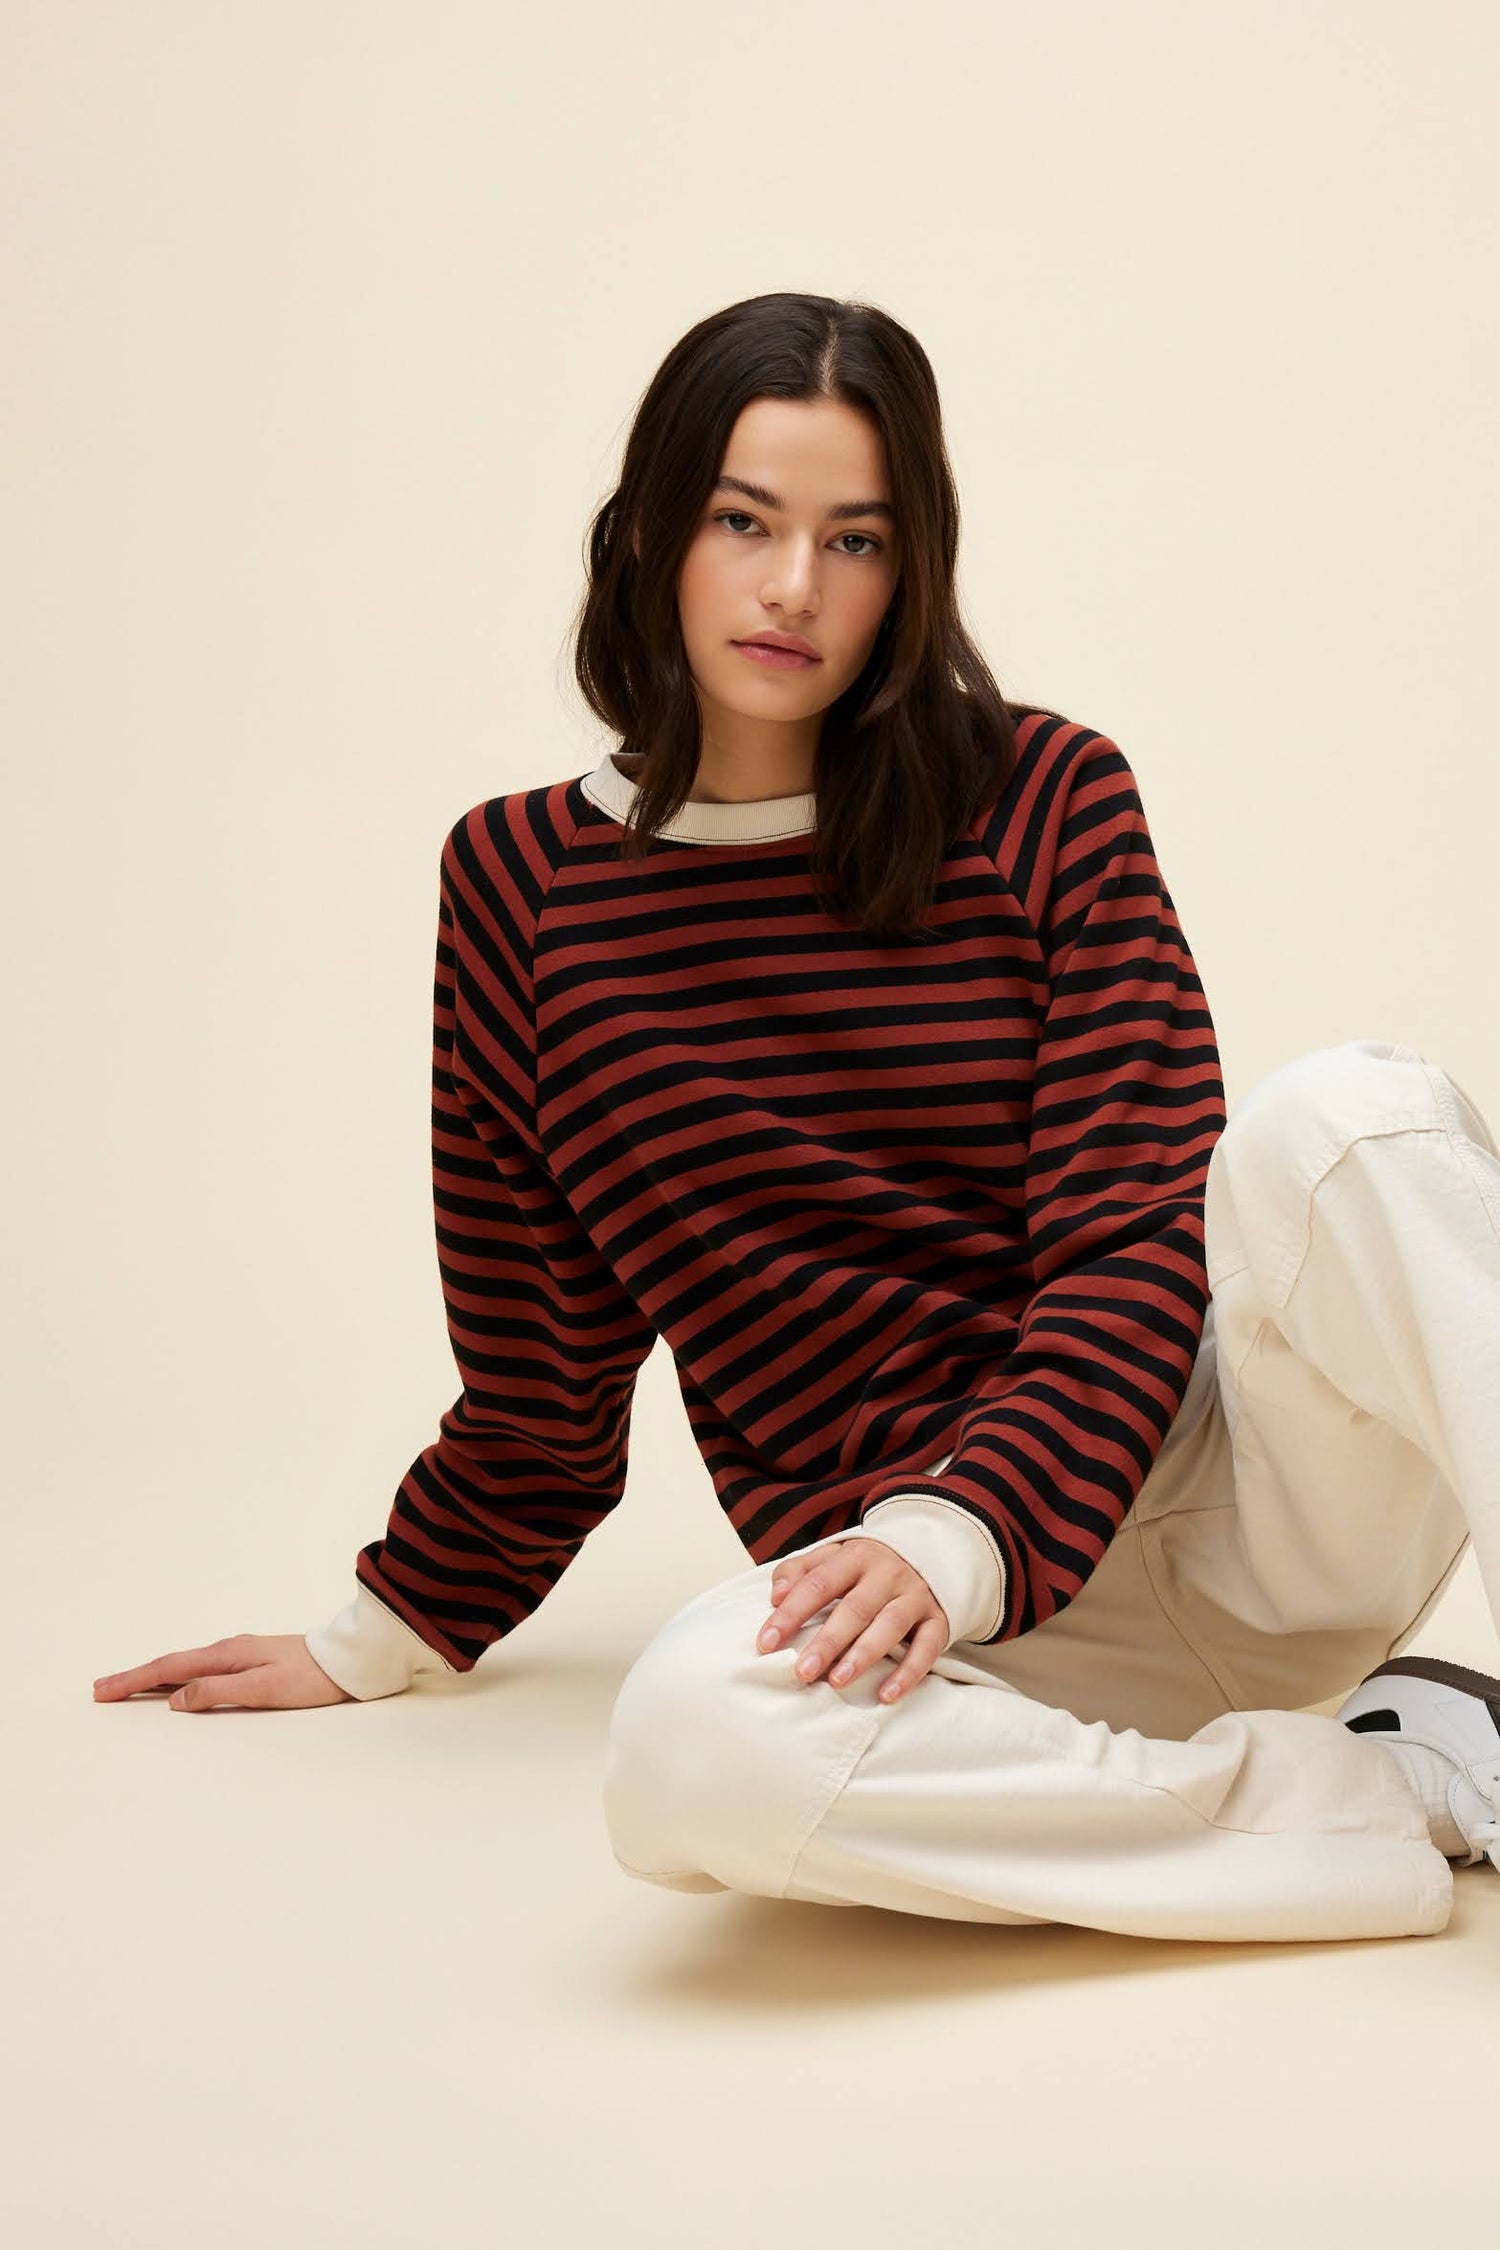 A model featuring a brown combo stripe vintage sweatshirt